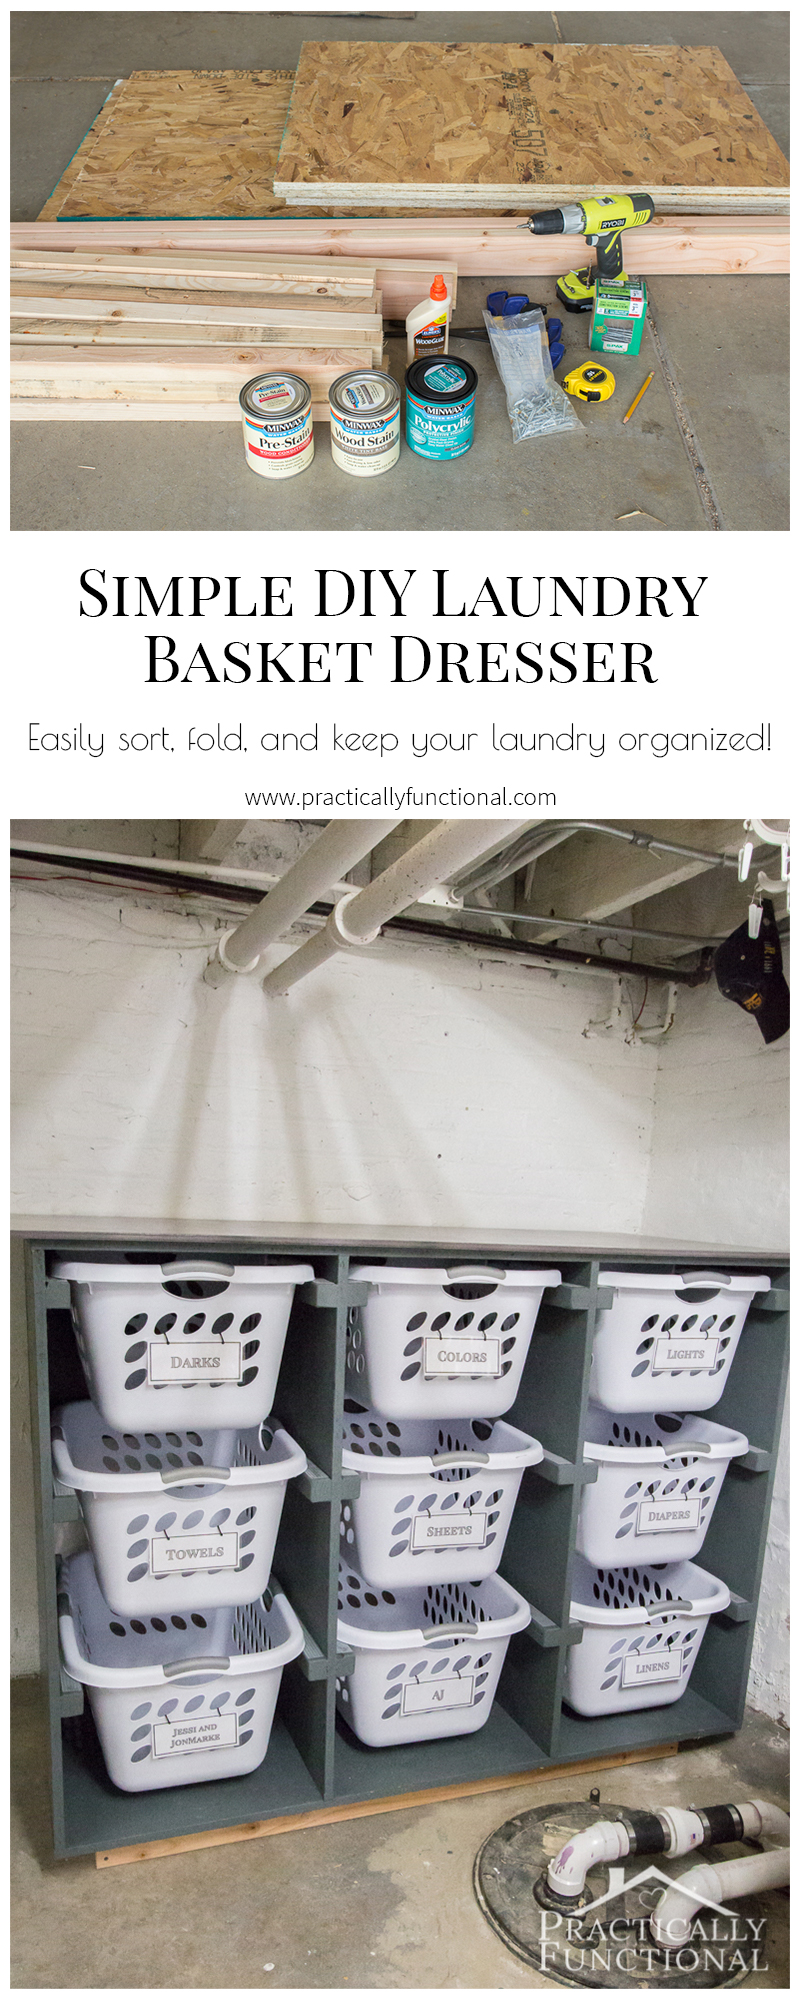 Build a simple laundry basket dresser to organize your laundry room, with a smooth top for folding and sorting!